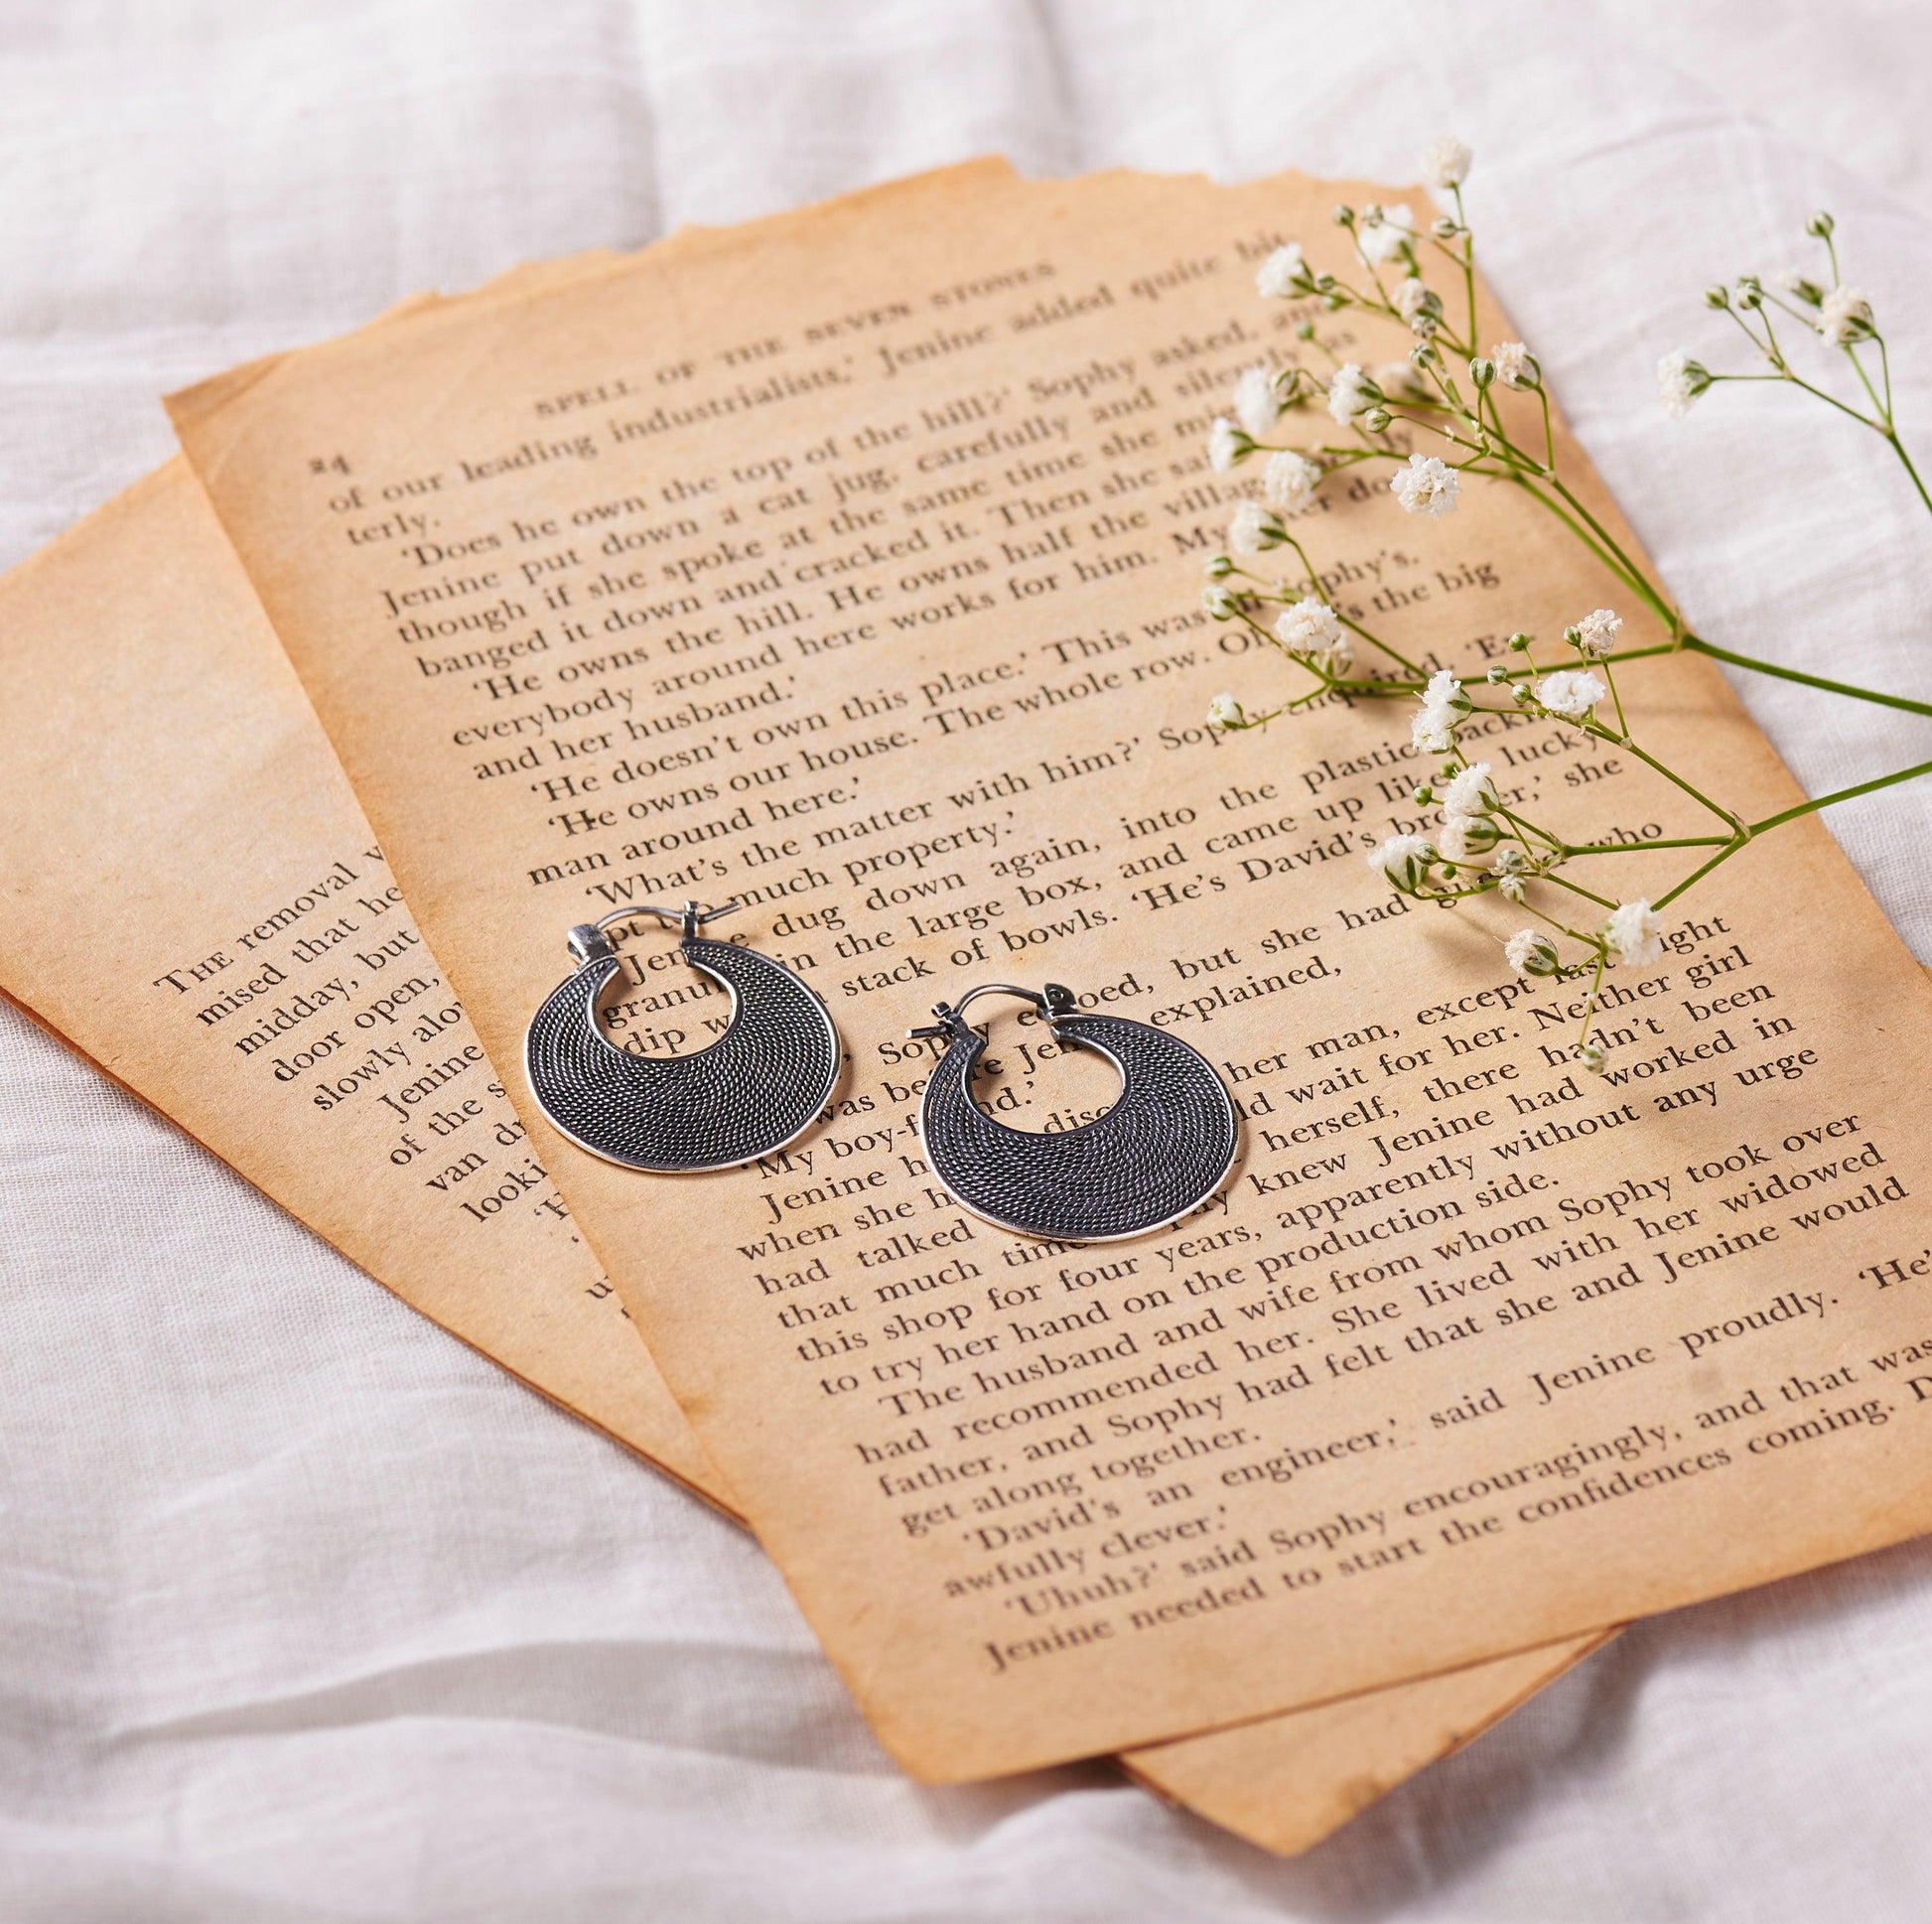 Oxidized Silver Crescent Earrings Dhanaza